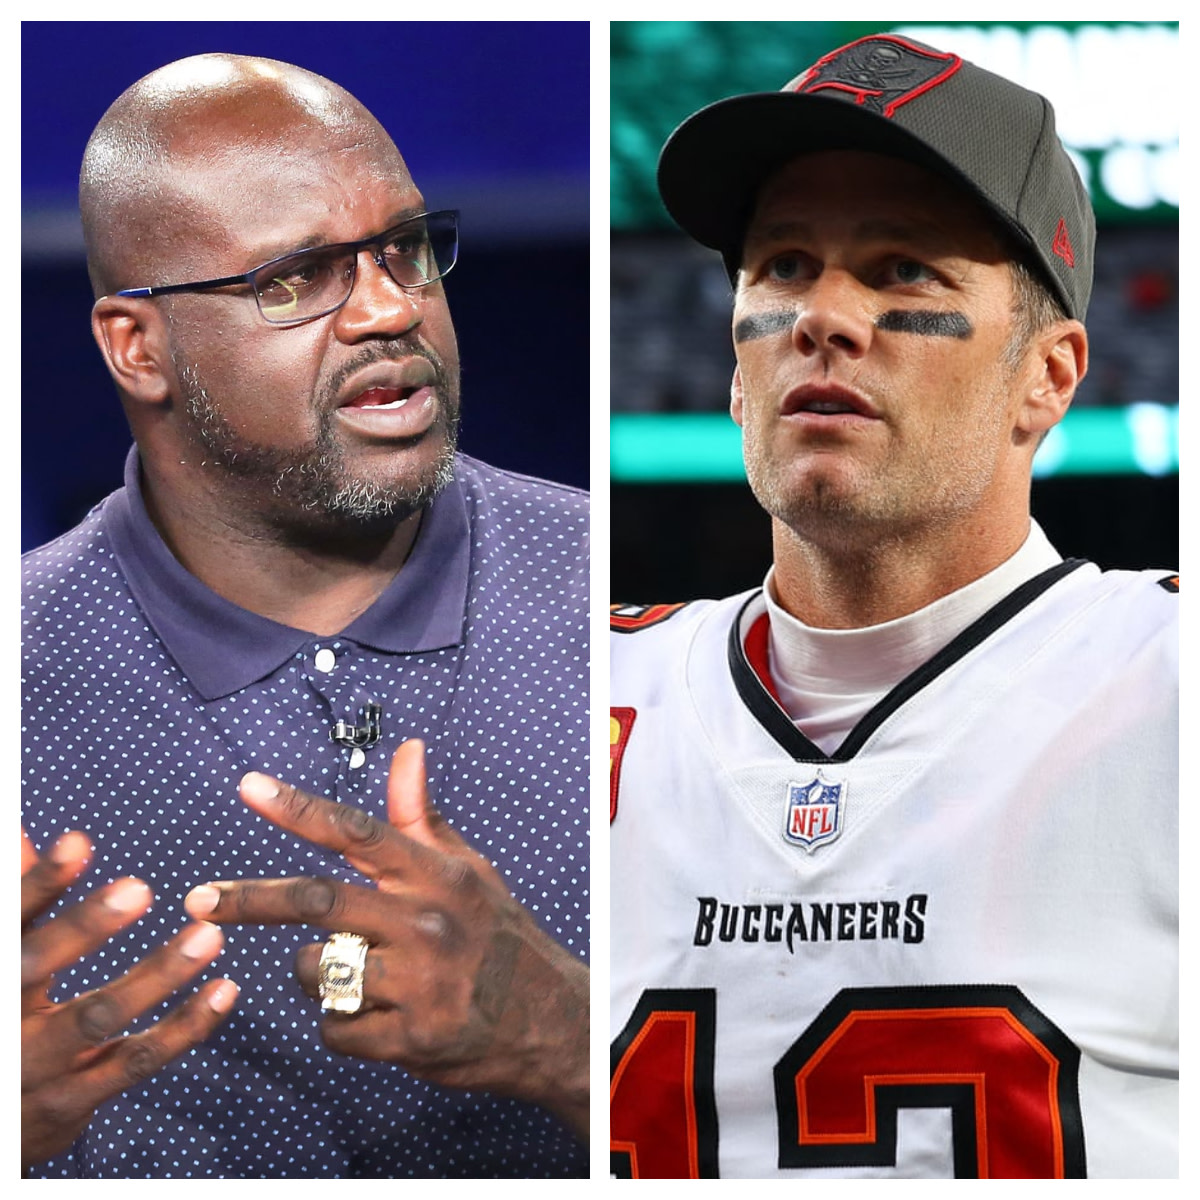 Shaquille O'Neal Isn't Ready For Tom Brady To Retire: "No Man, Get Your Butt Up And Do One More Year"